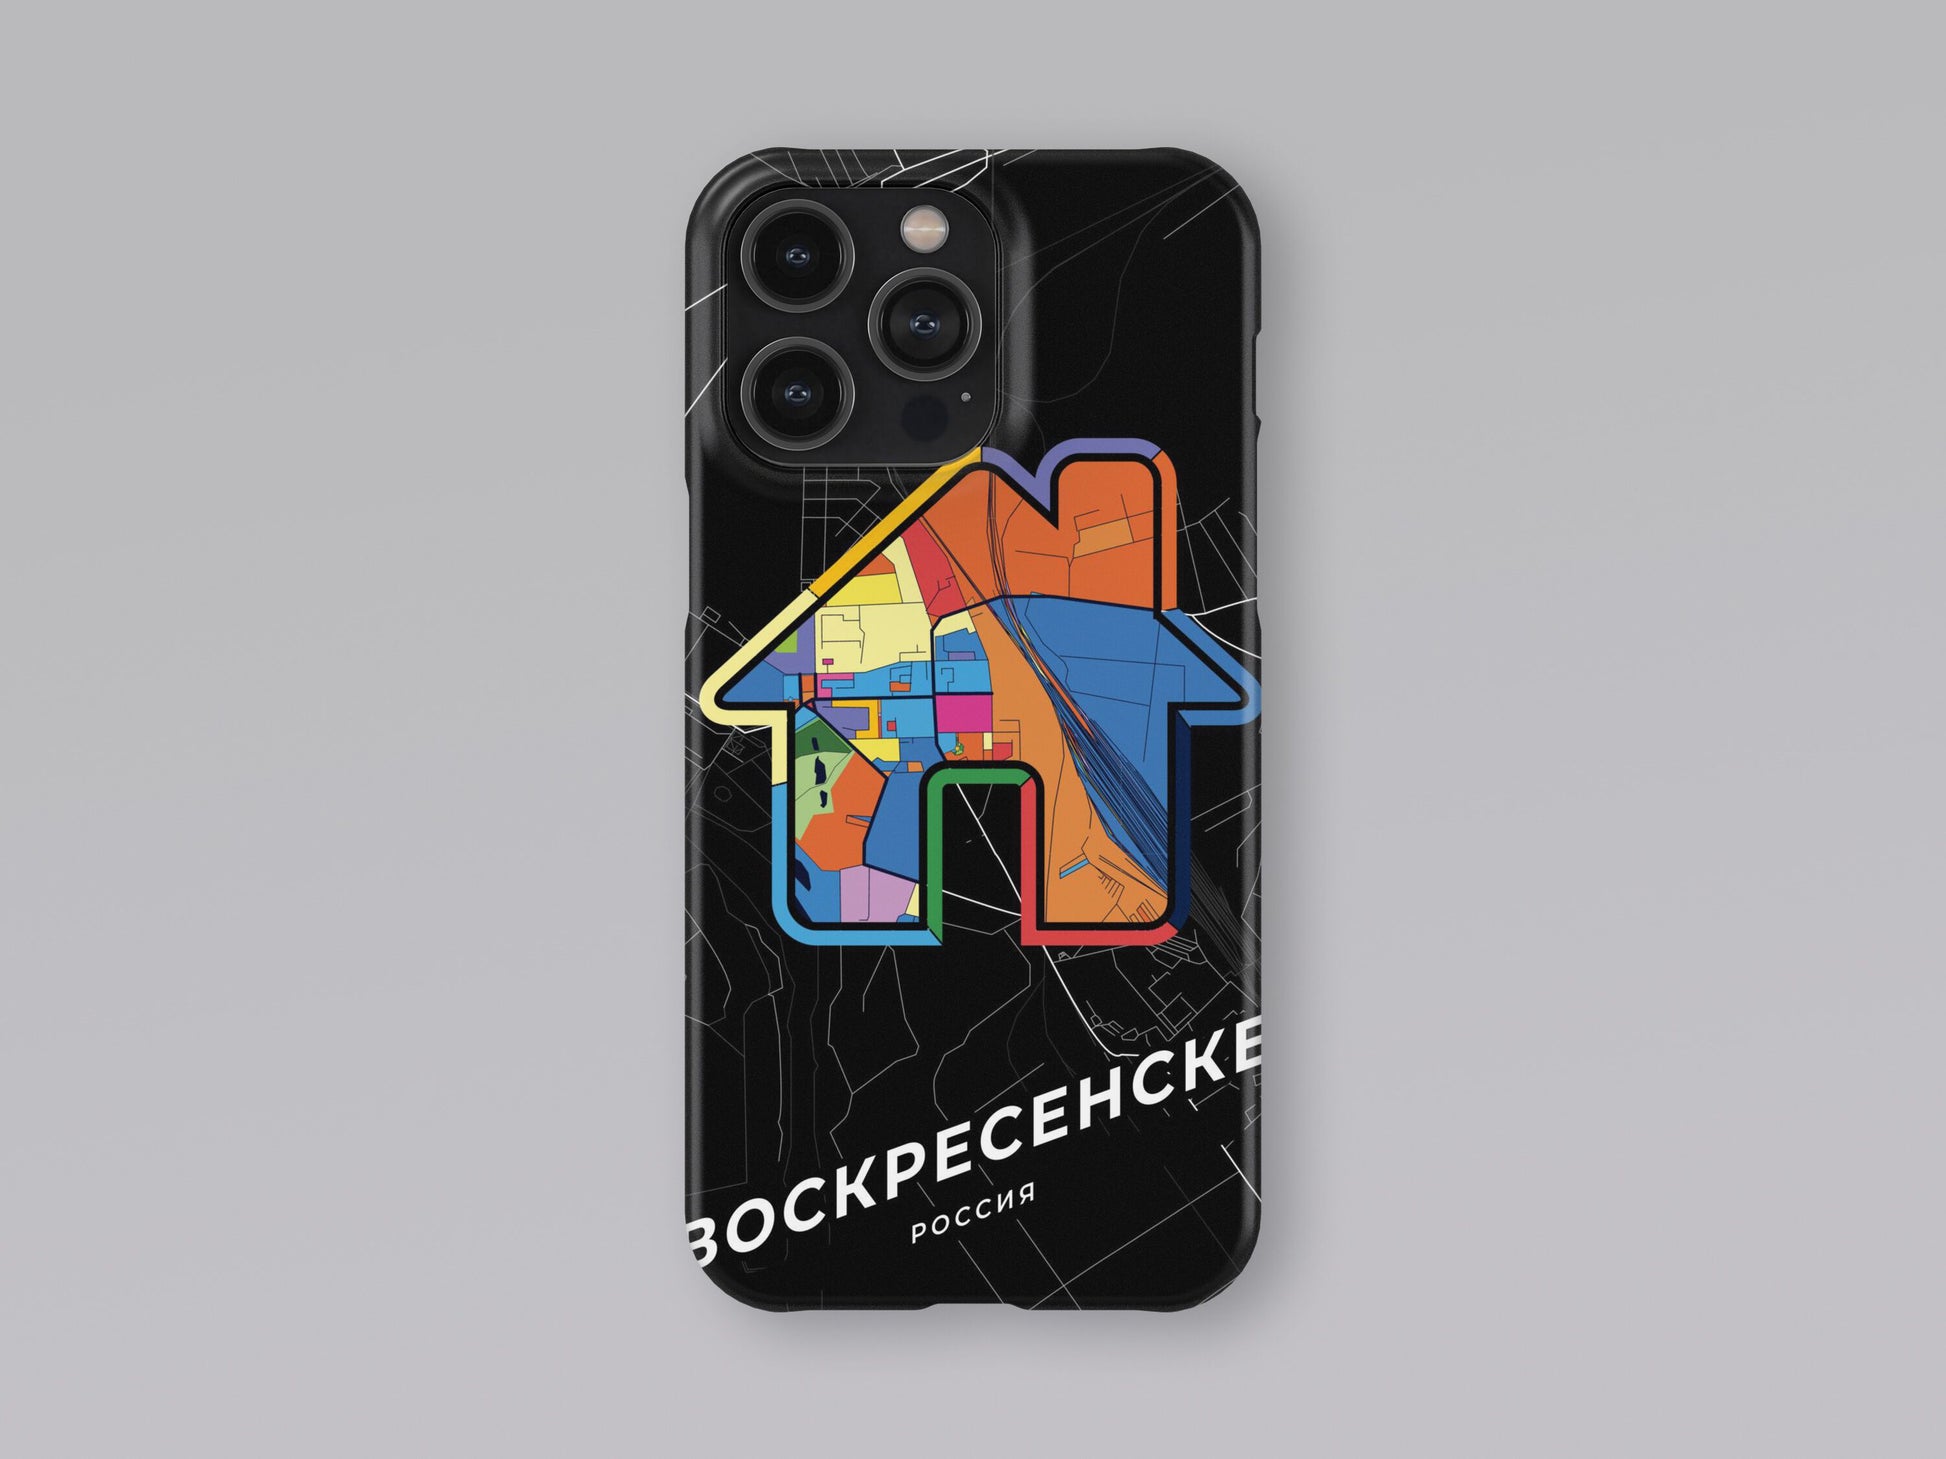 Voskresensk Russia slim phone case with colorful icon 3